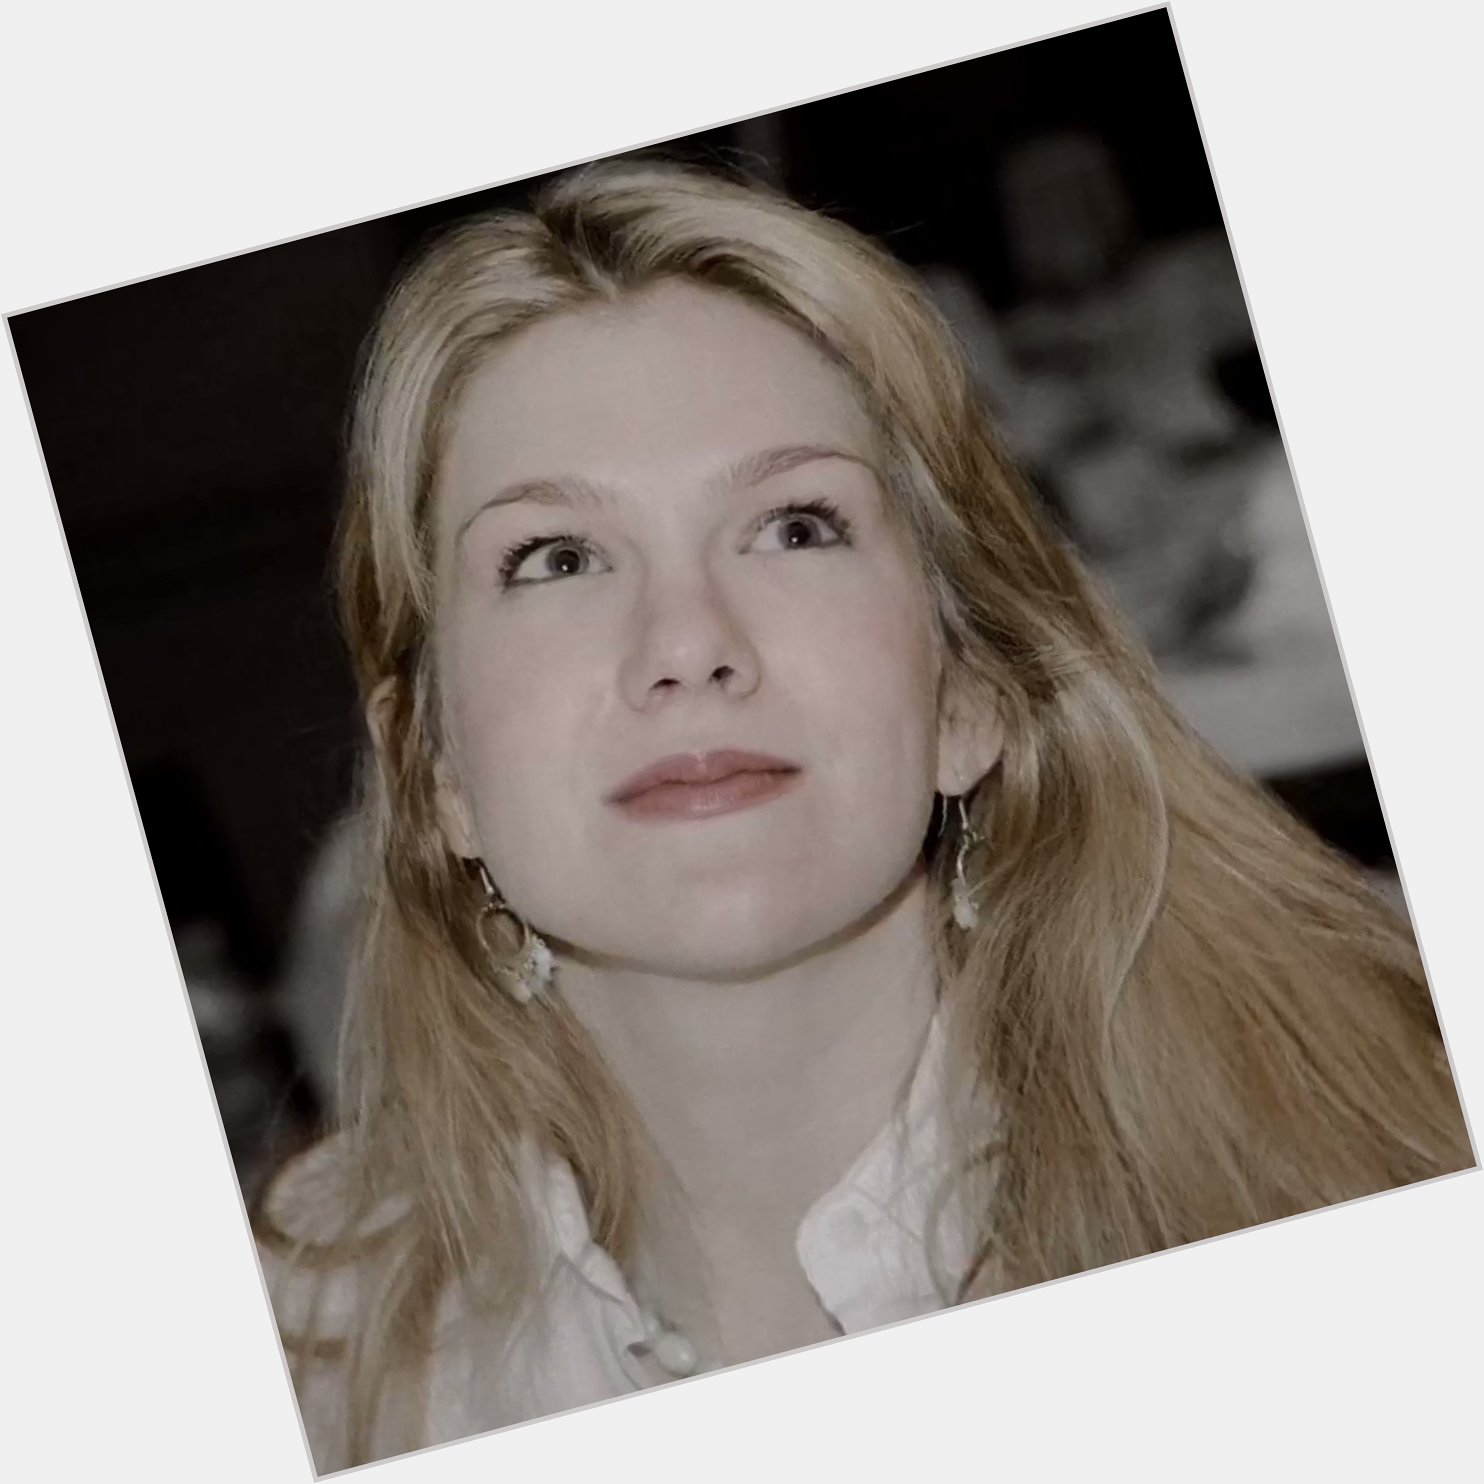 Happy birthday to my fav person on the entire planet: lily rabe !!! <3 